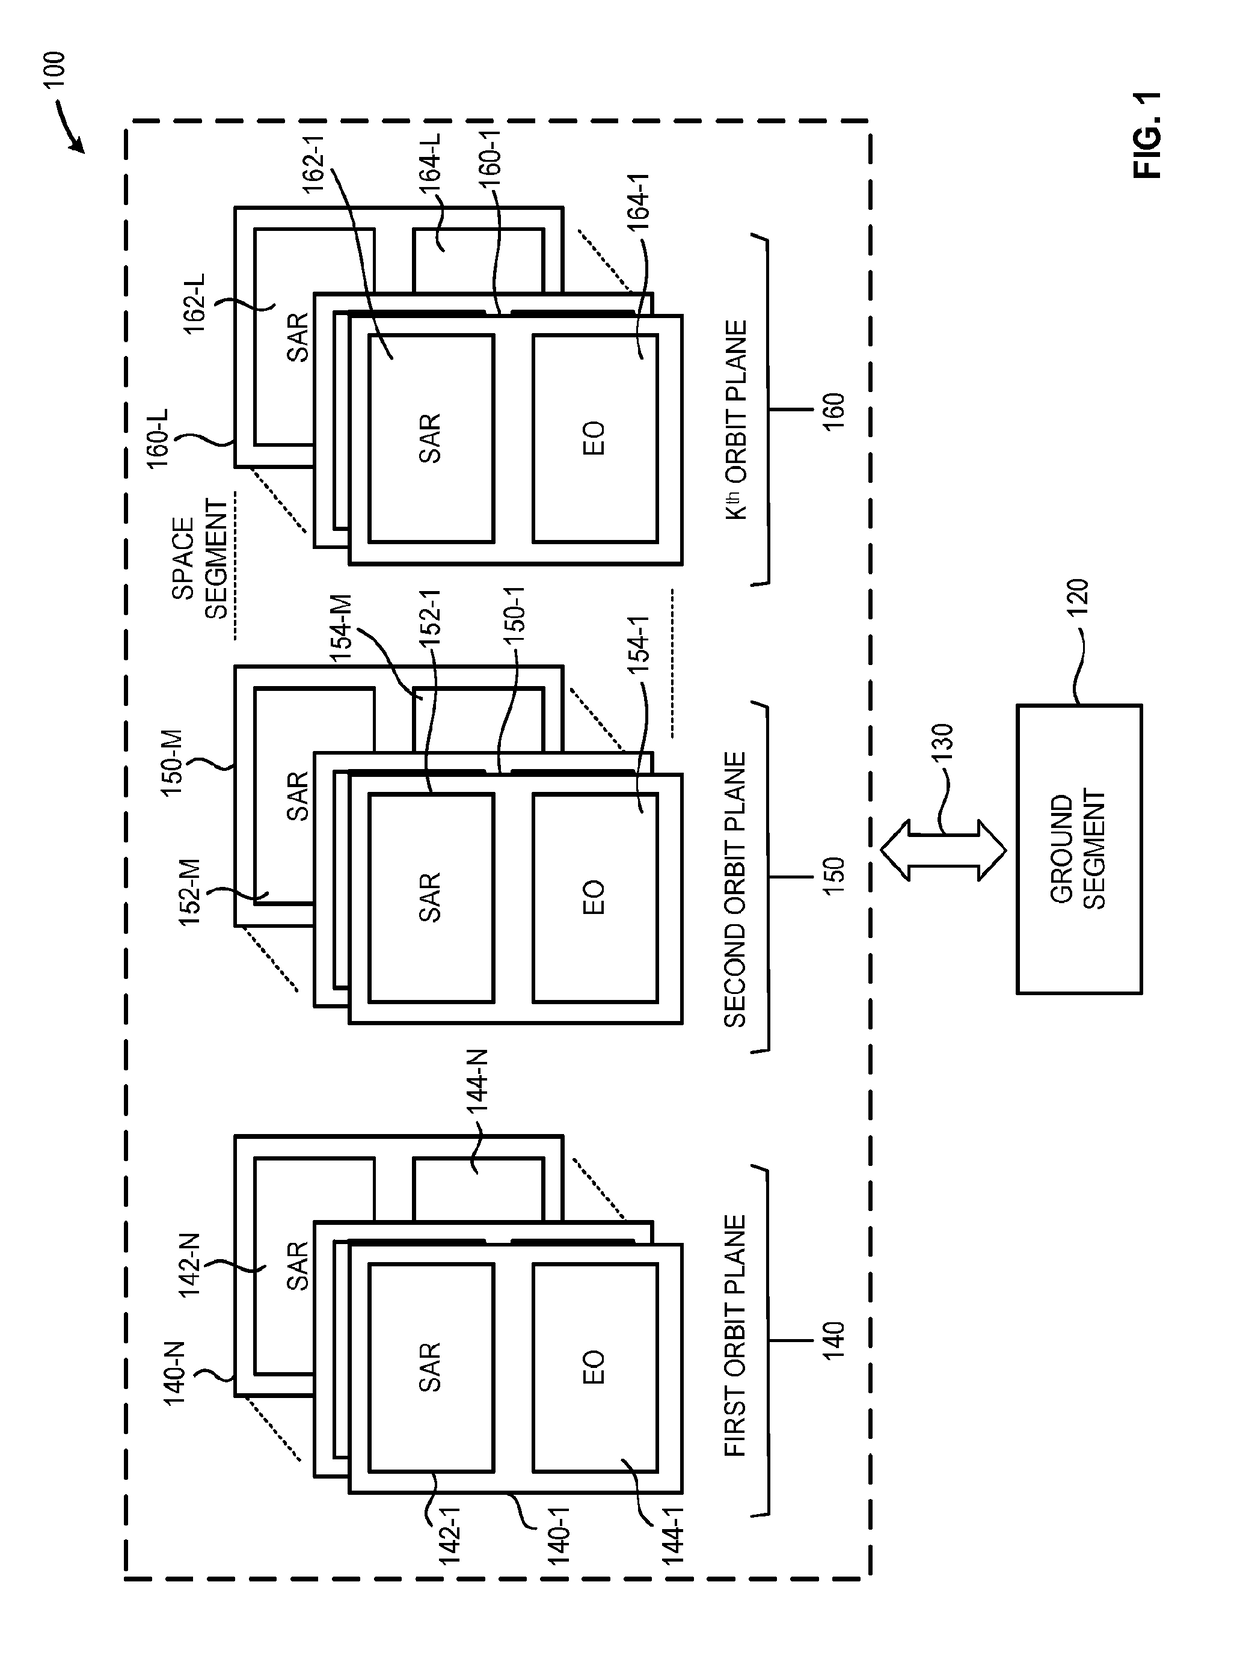 Systems and methods for remote sensing of the earth from space